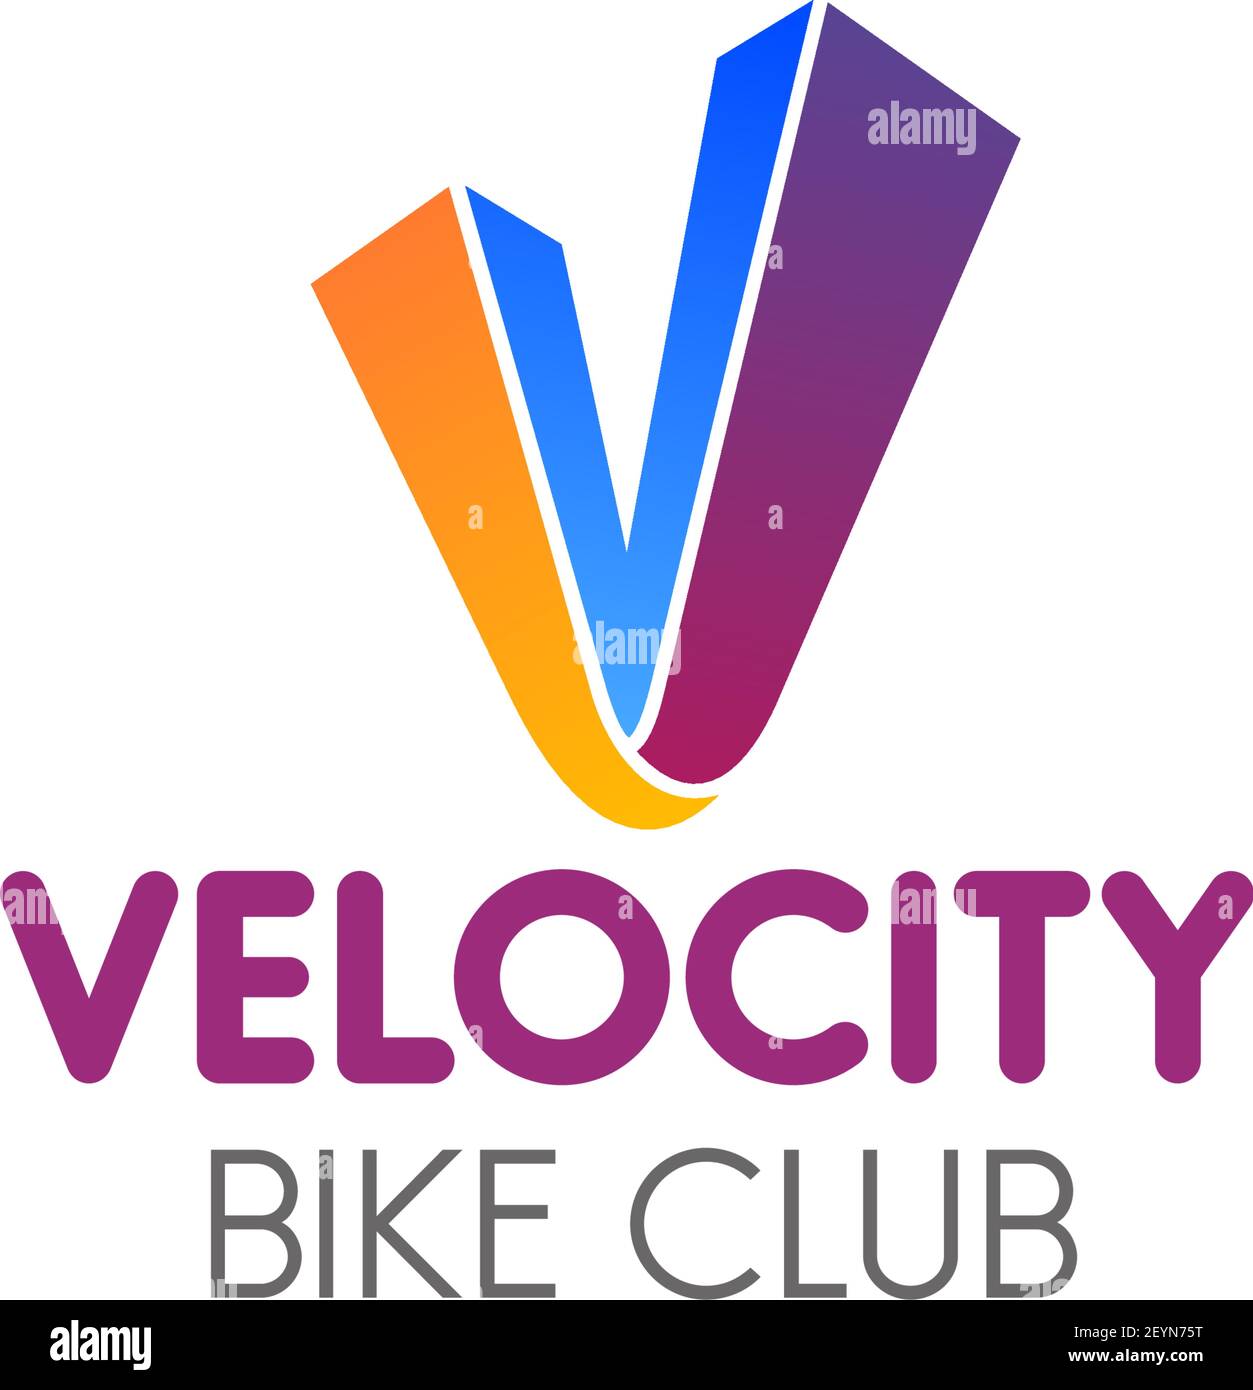 Velocity bike club vector icon isolated on white background. Creative emblem for extreme sport club, concept of healthy lifestyle. Vector design symbo Stock Vector